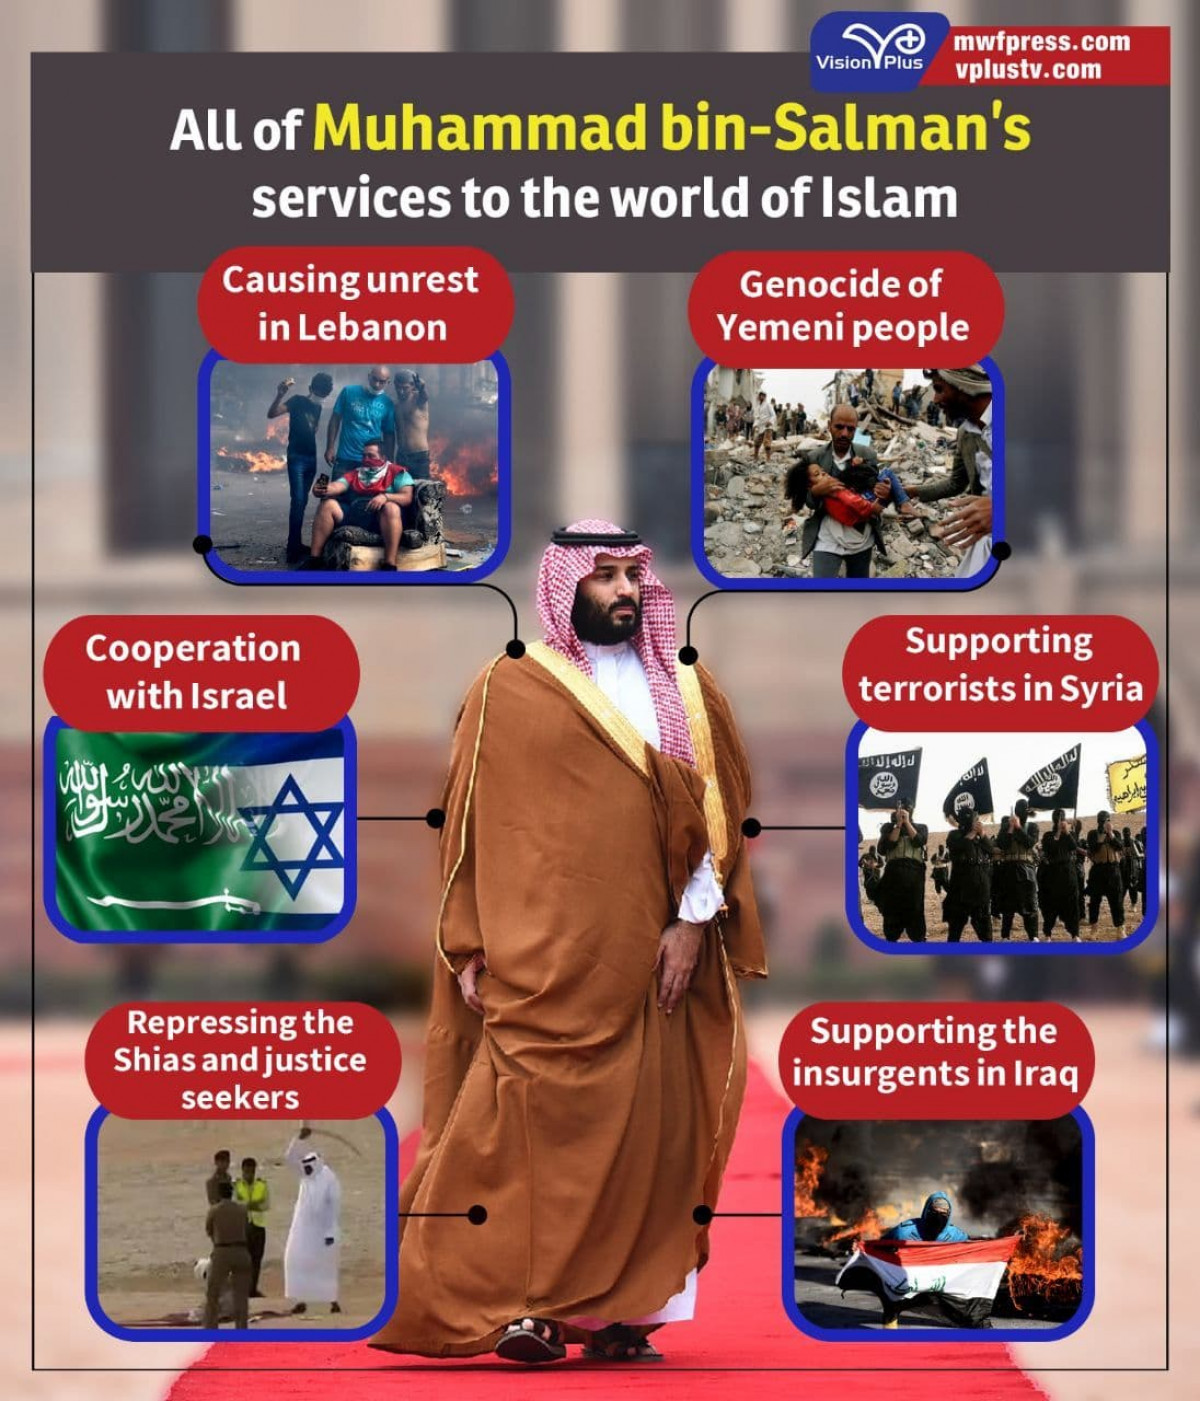 All of Muhammad bin-Salman’s services to the world of Islam